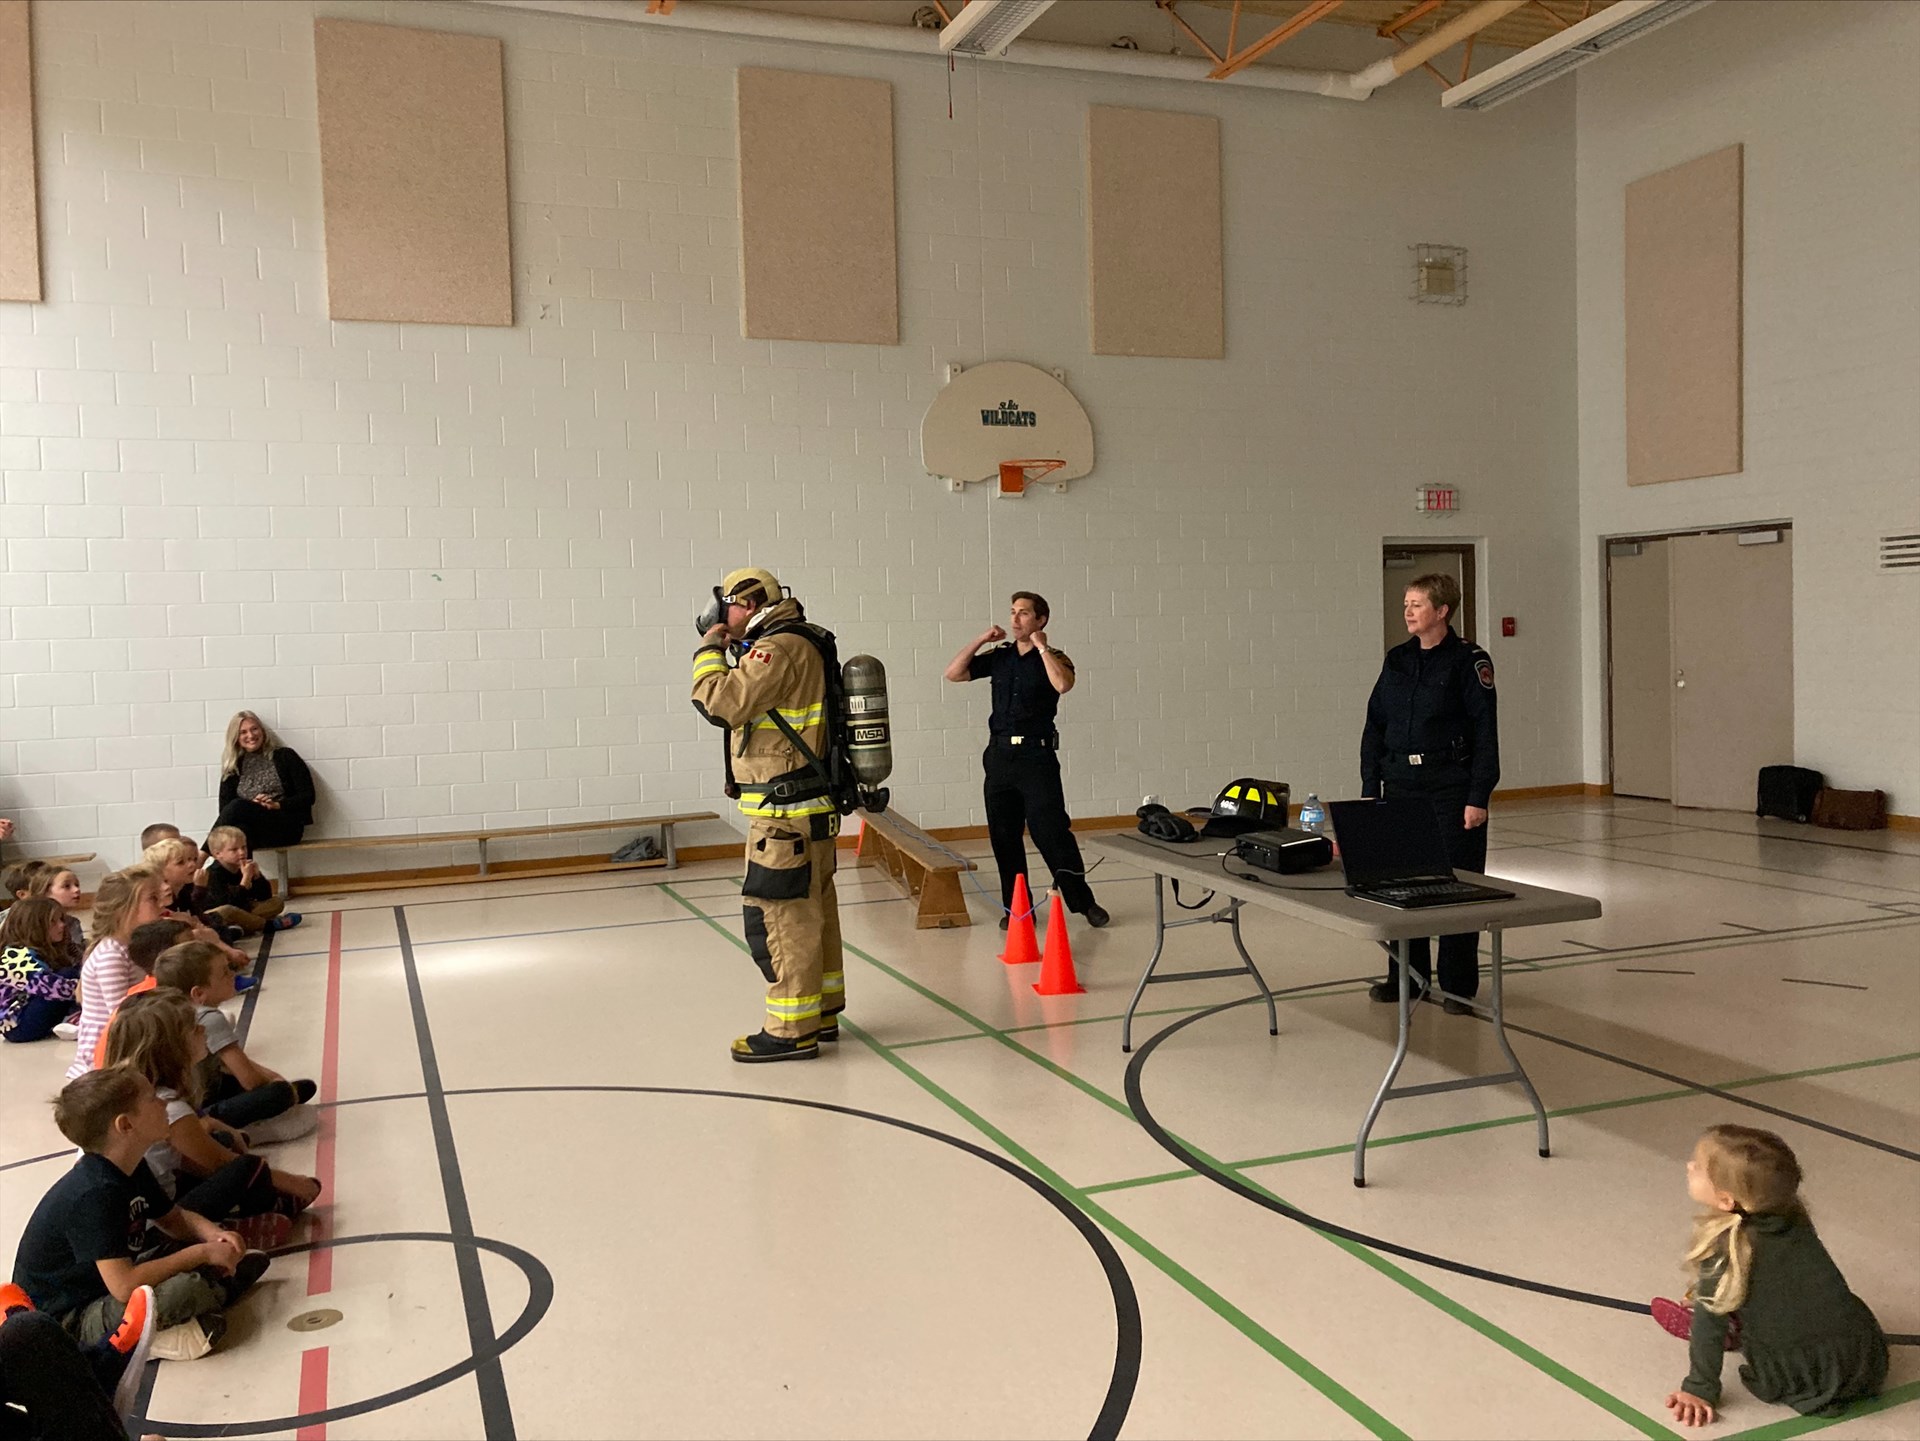  South Frontenac Fire Department visits the school